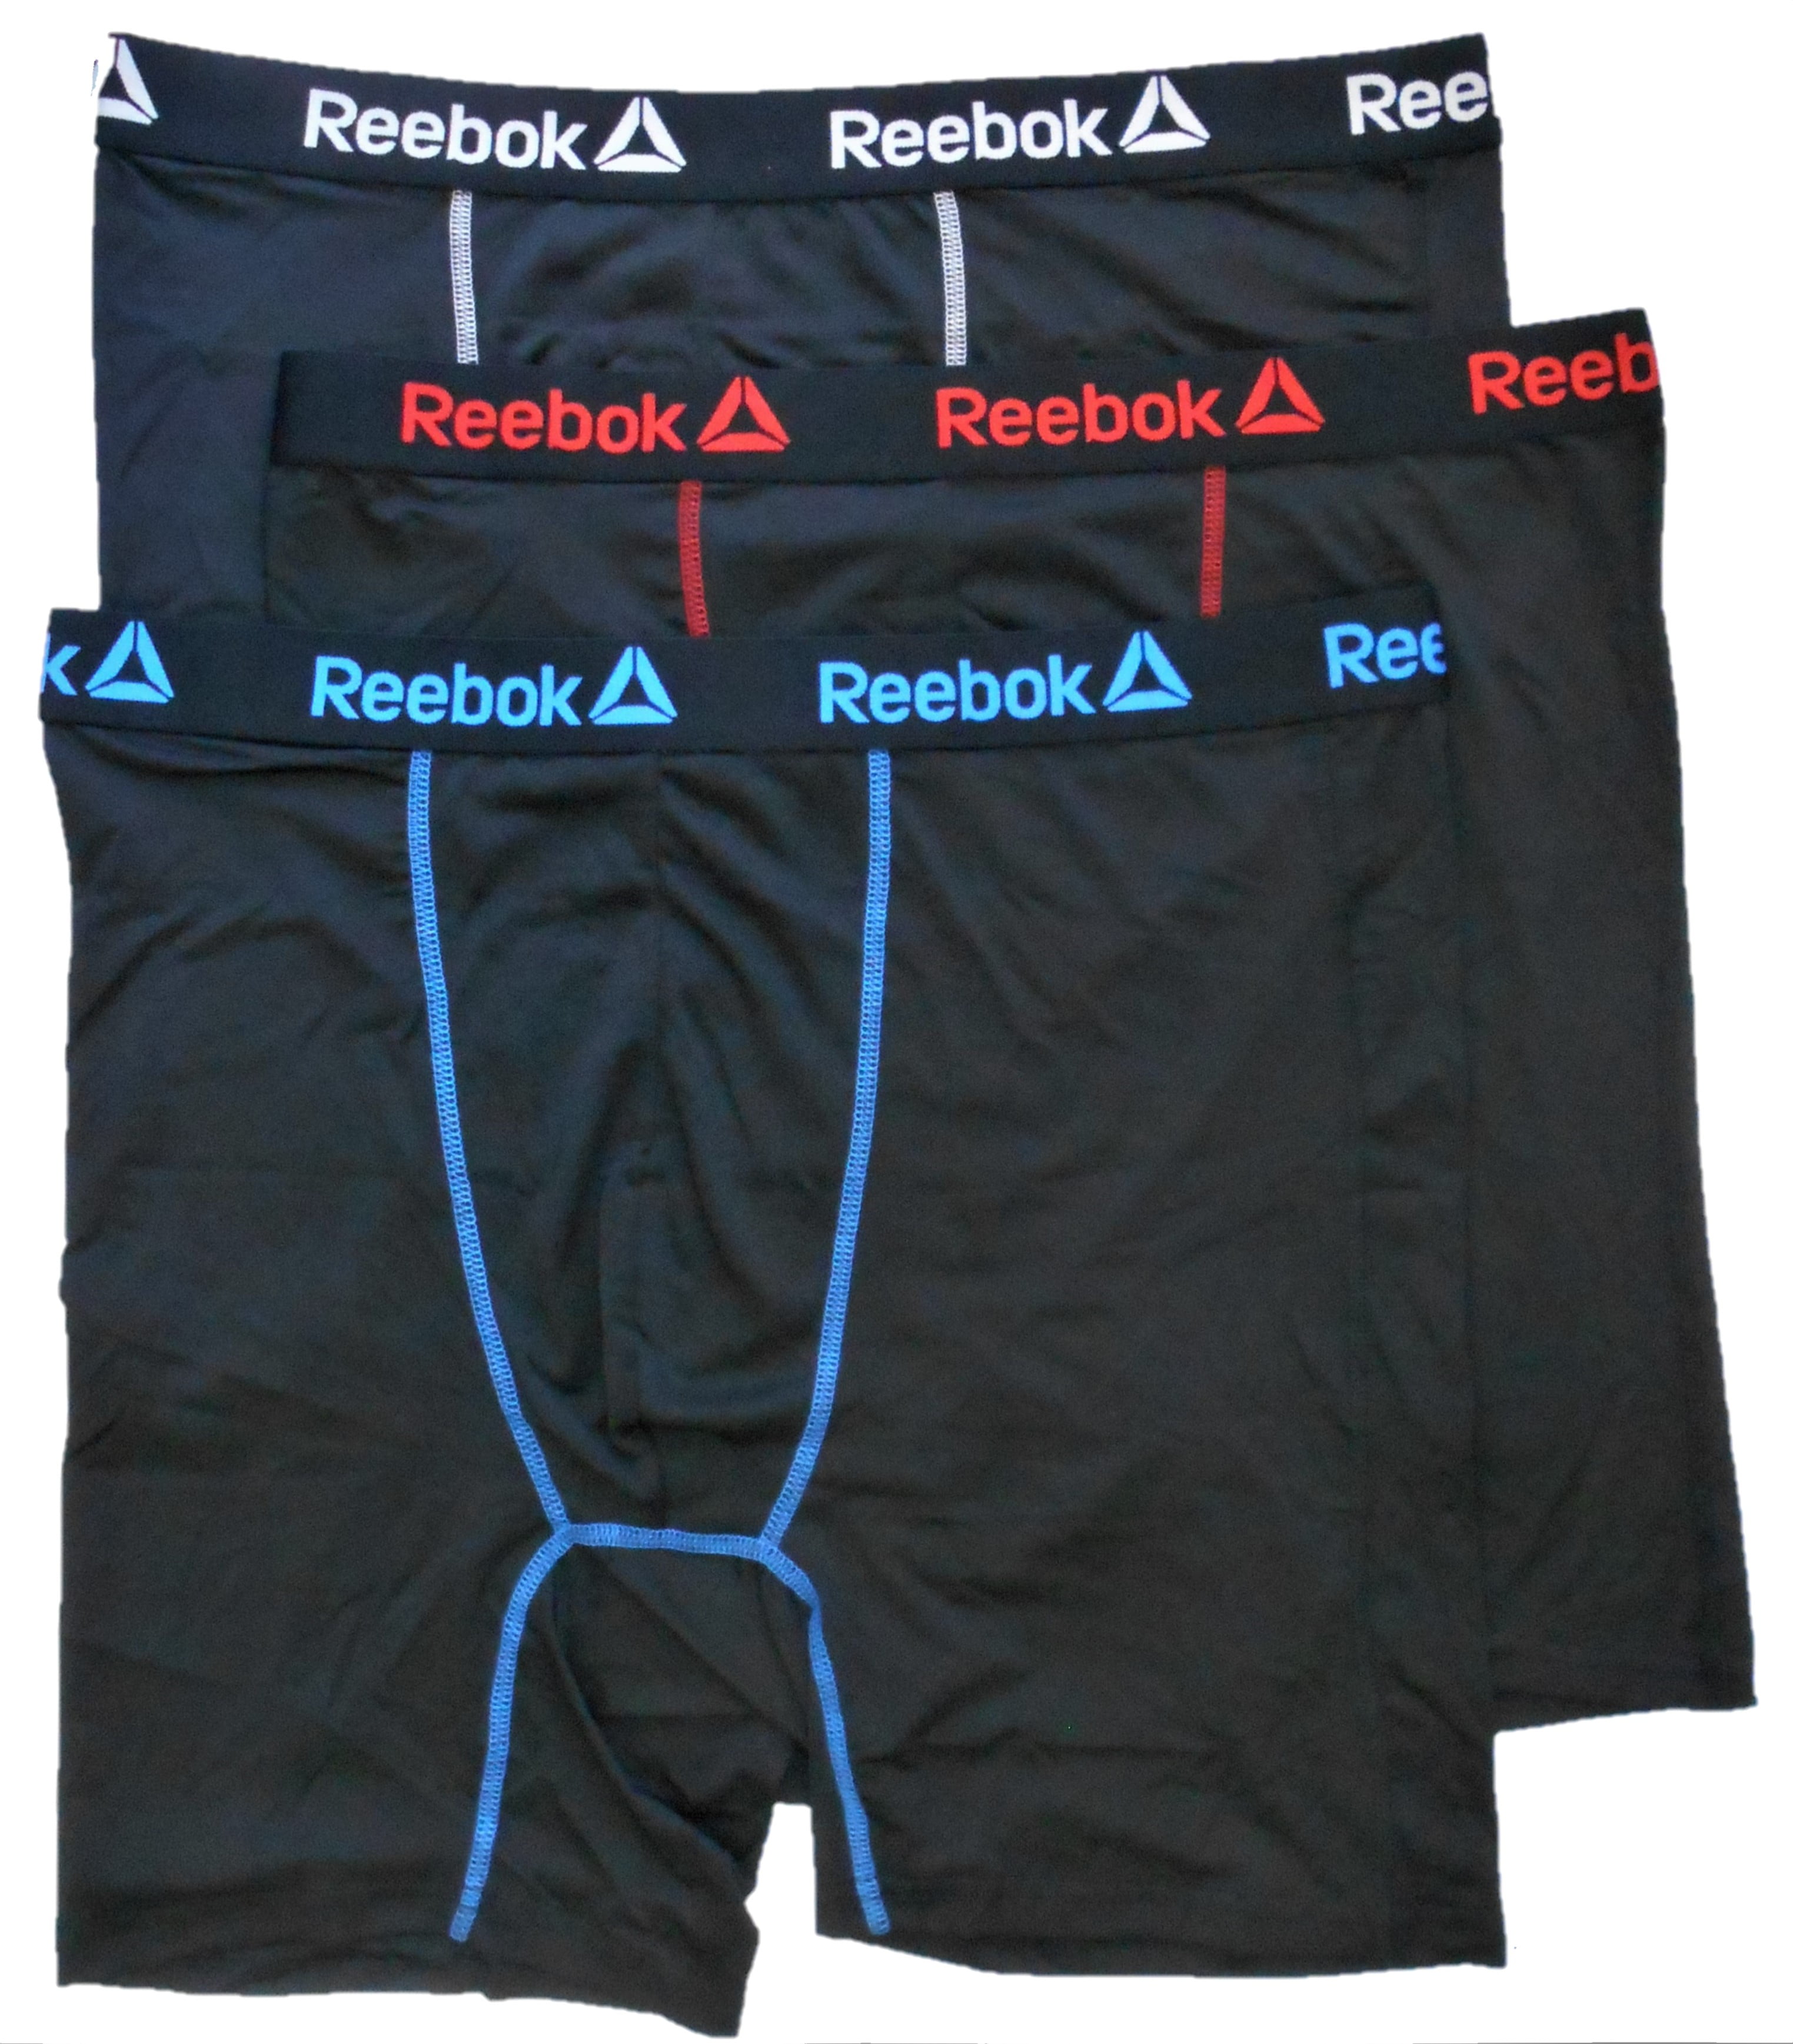 All Black Reebok Men's Big and Tall Athletic Performance Assorted Boxer Briefs Size 4XL 6 Pack 